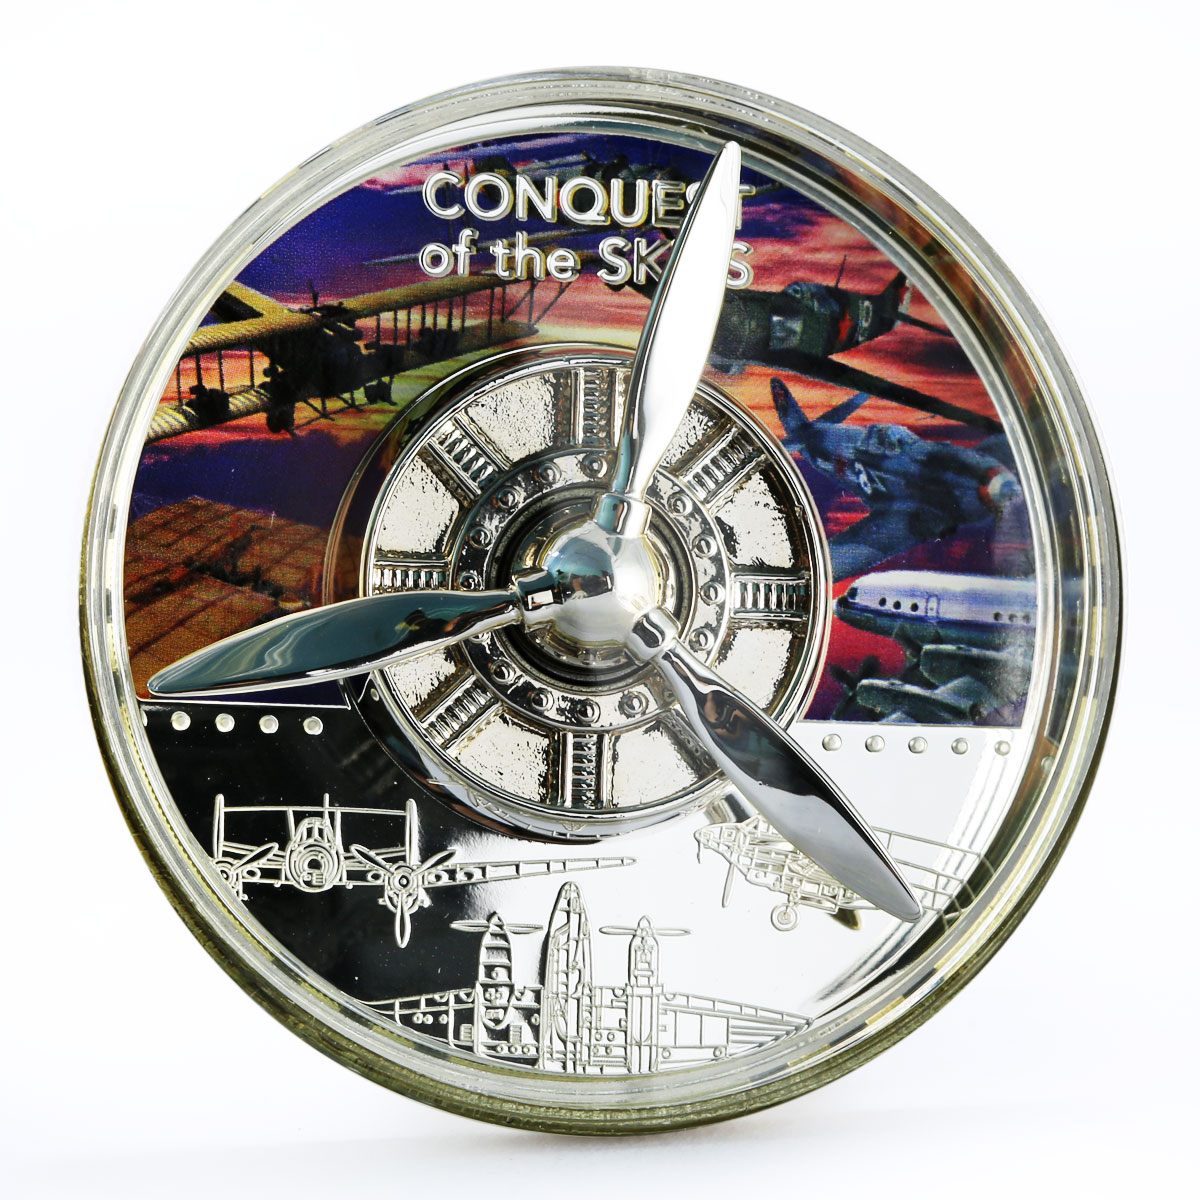 Tanzania set of 2 coins The Conquest of the Skies colored silver coins 2019